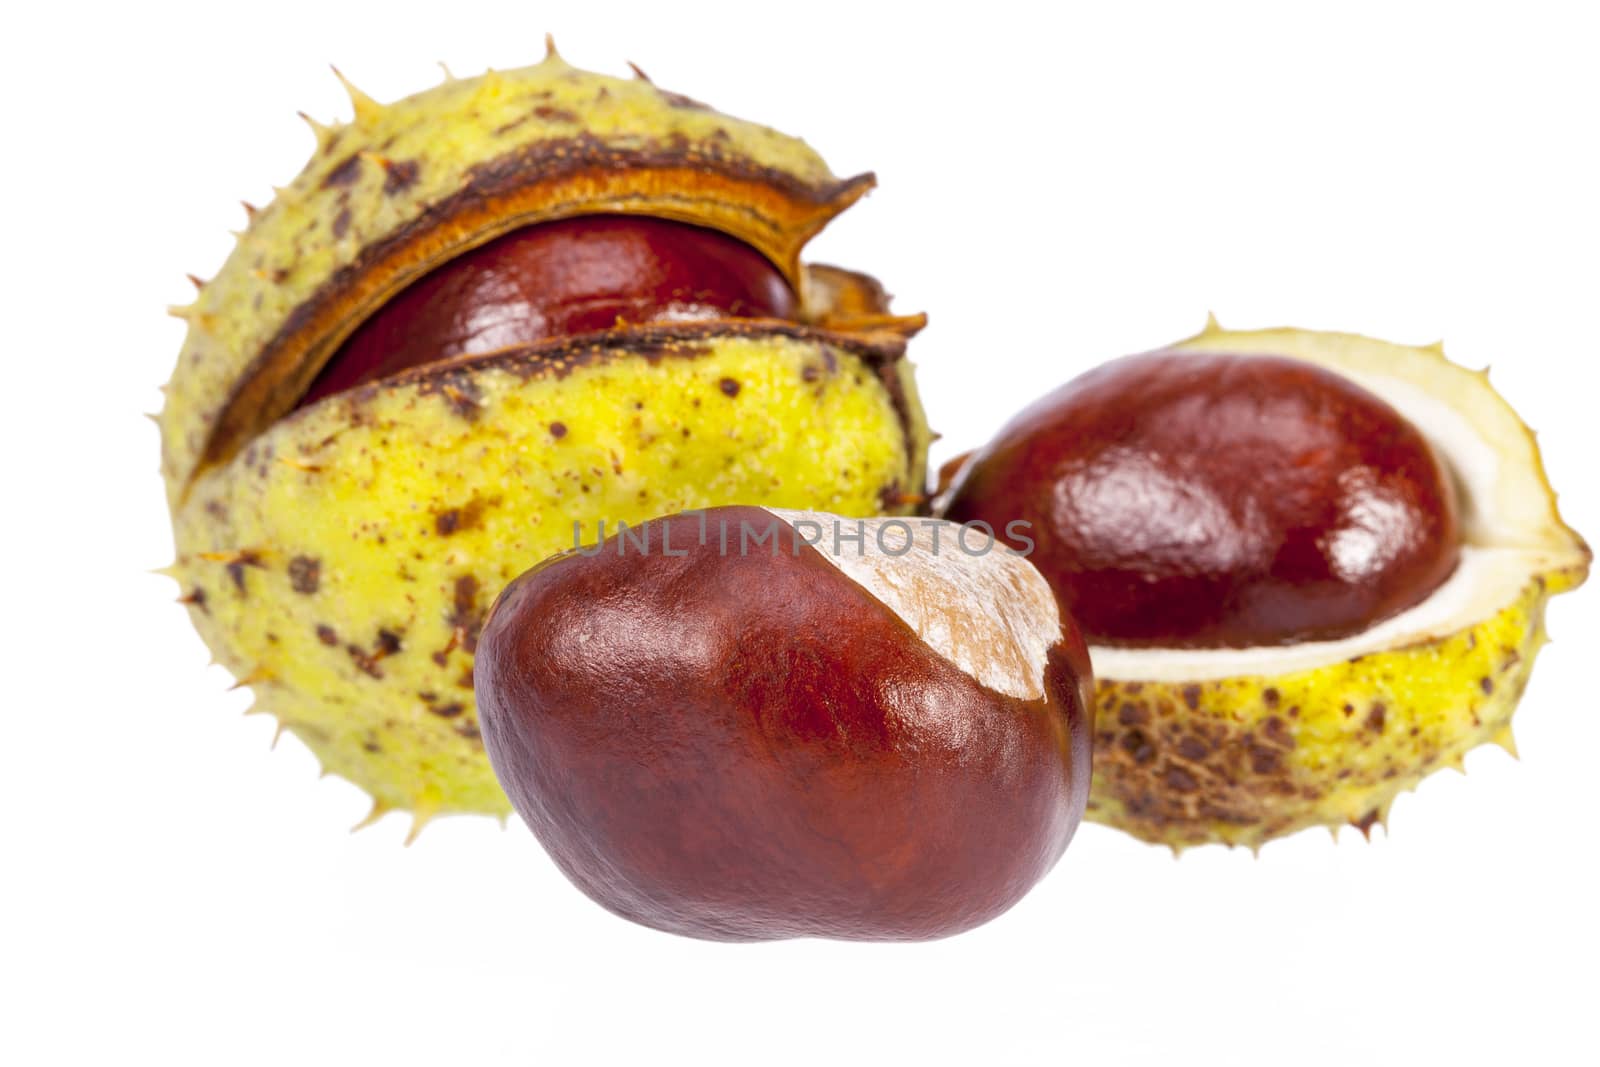 Fruits of chestnuts in green shell isolated on white background, close up